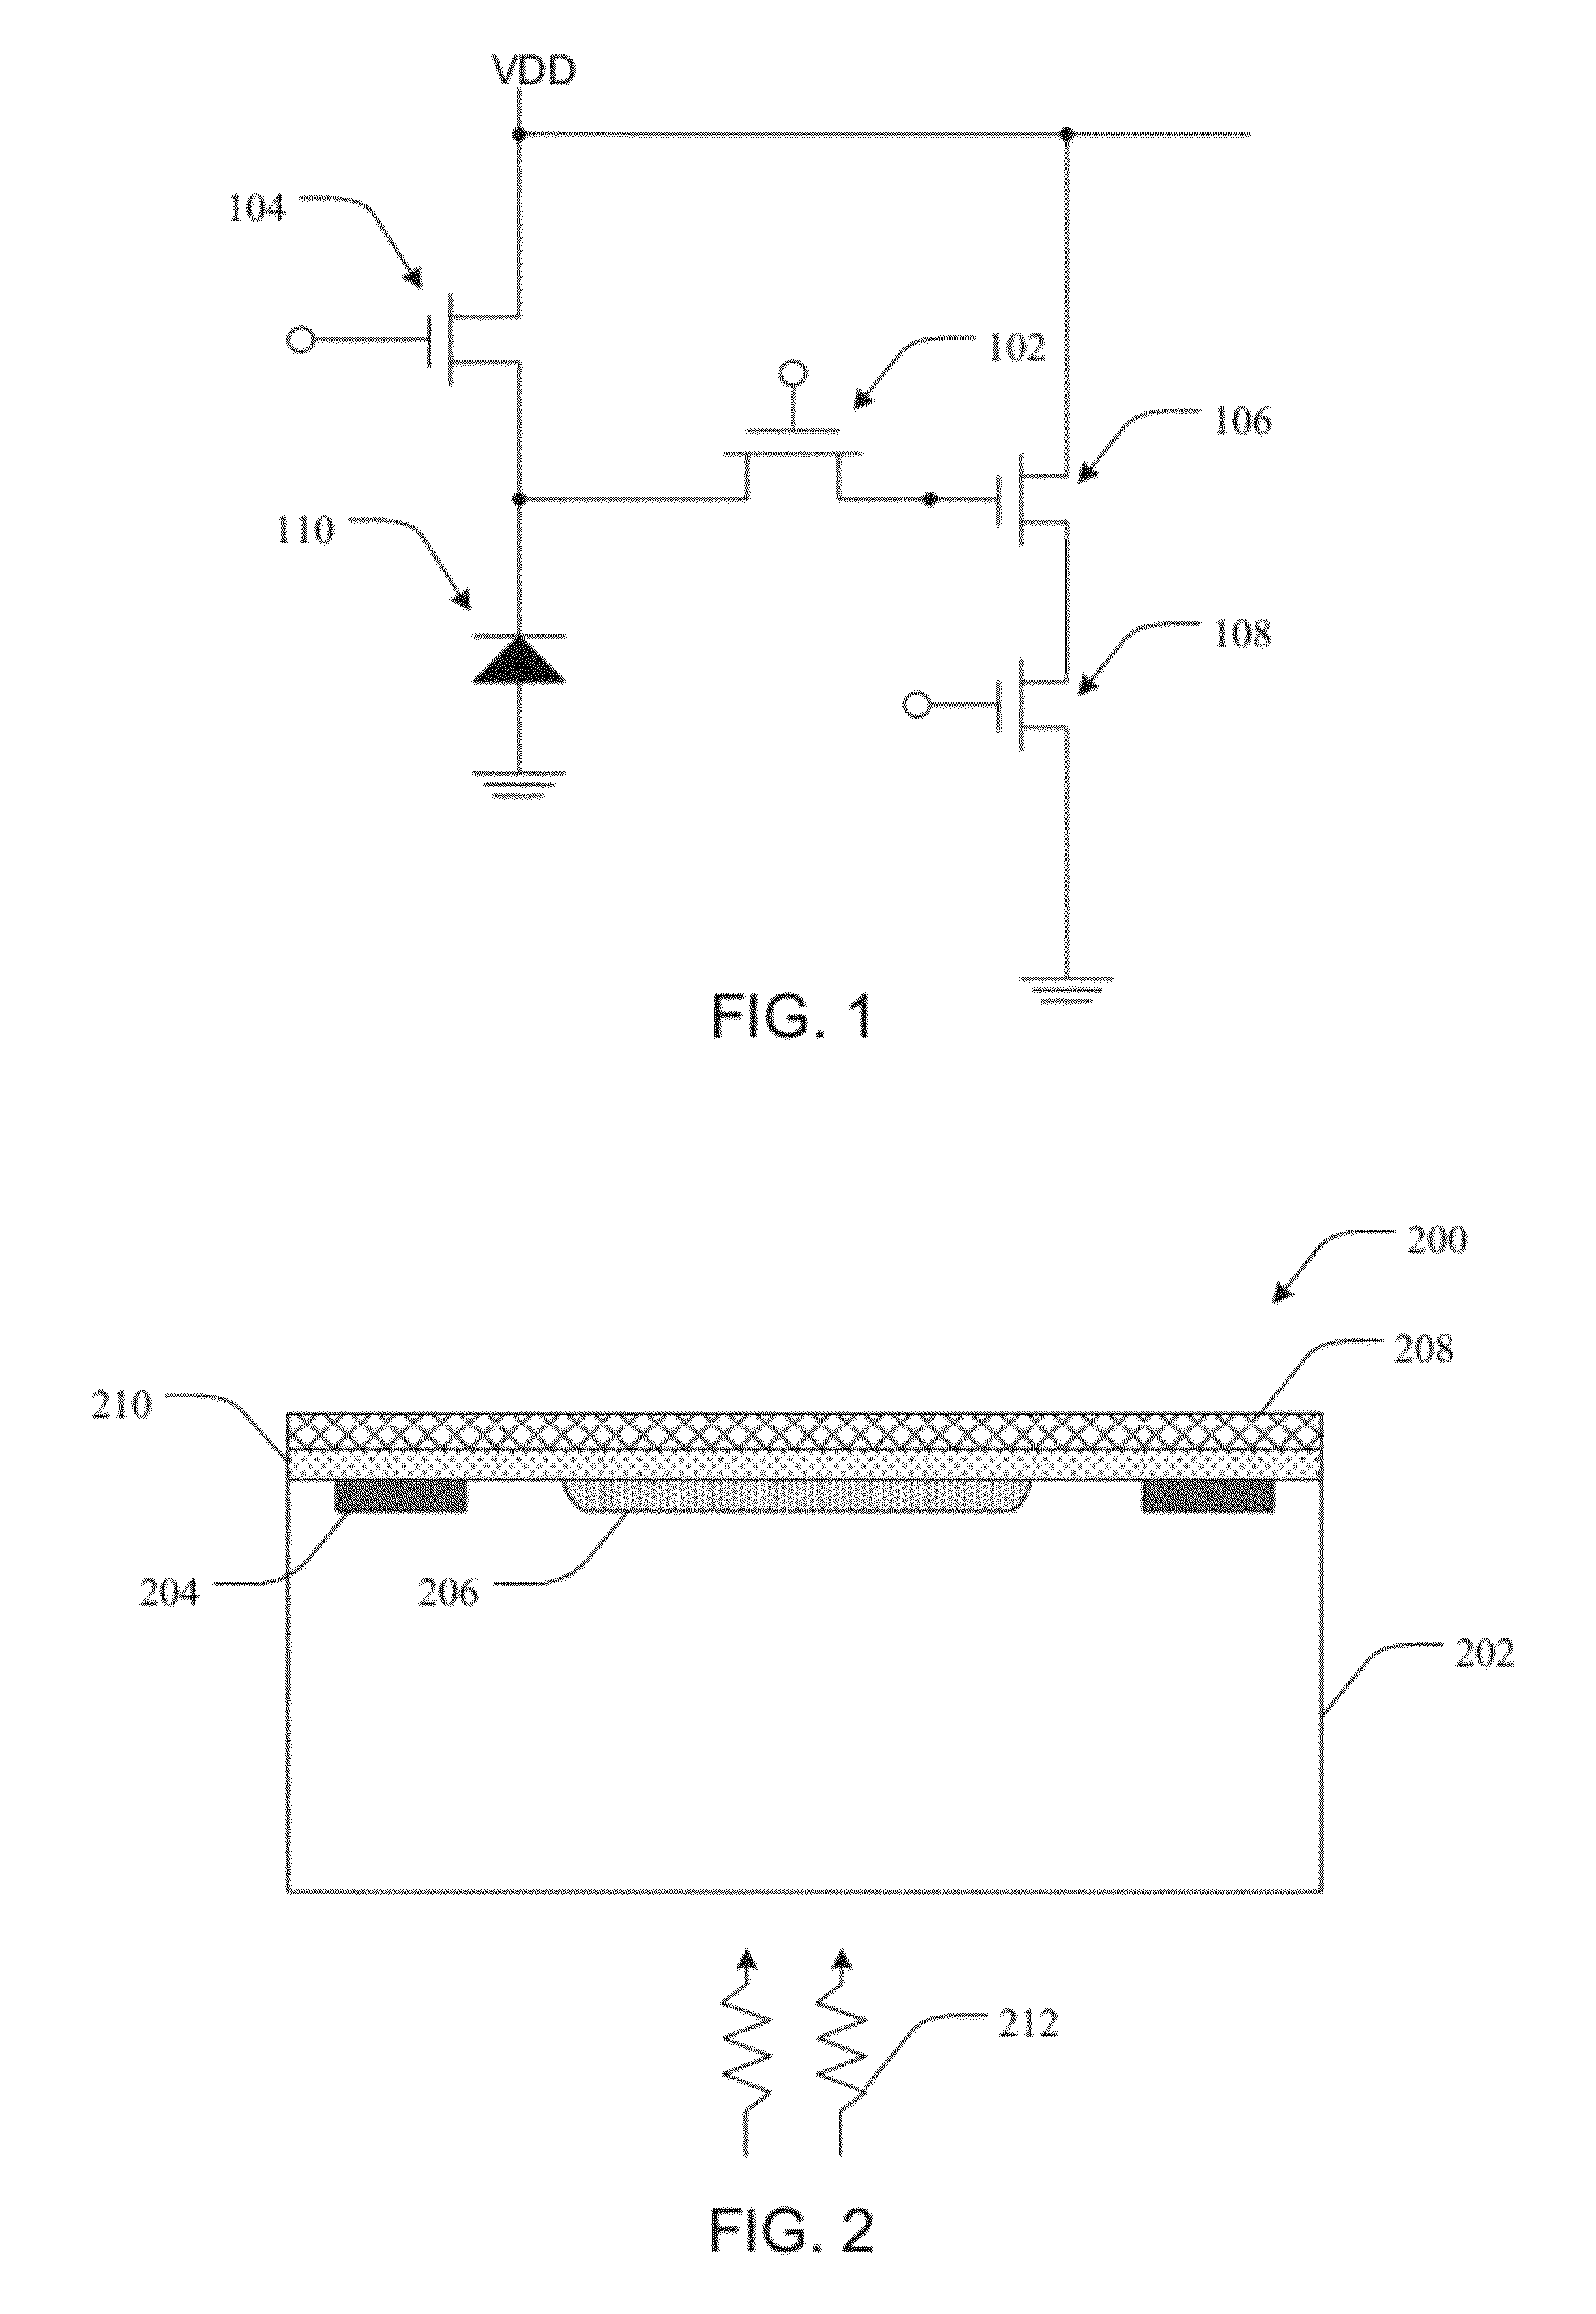 Process Module for Increasing the Response of Backside Illuminated Photosensitive Imagers and Associated Methods